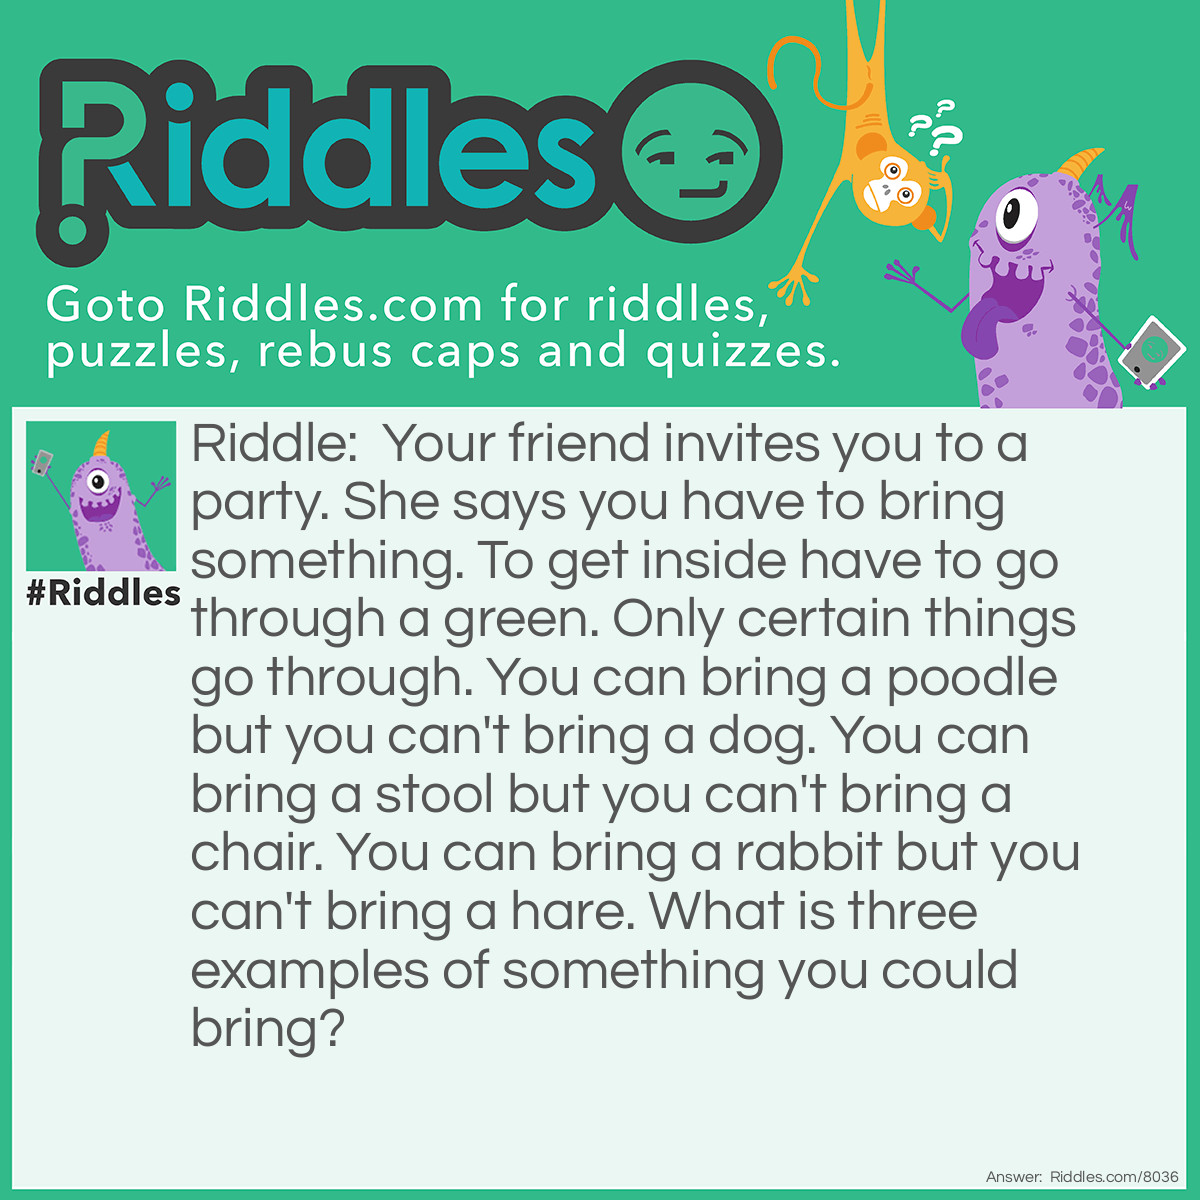 Riddle: Your friend invites you to a party. She says you have to bring something. To get inside have to go through a green. Only certain things go through. You can bring a poodle but you can't bring a dog. You can bring a stool but you can't bring a chair. You can bring a rabbit but you can't bring a hare. What is three examples of something you could bring? Answer: Anything with a double letter.